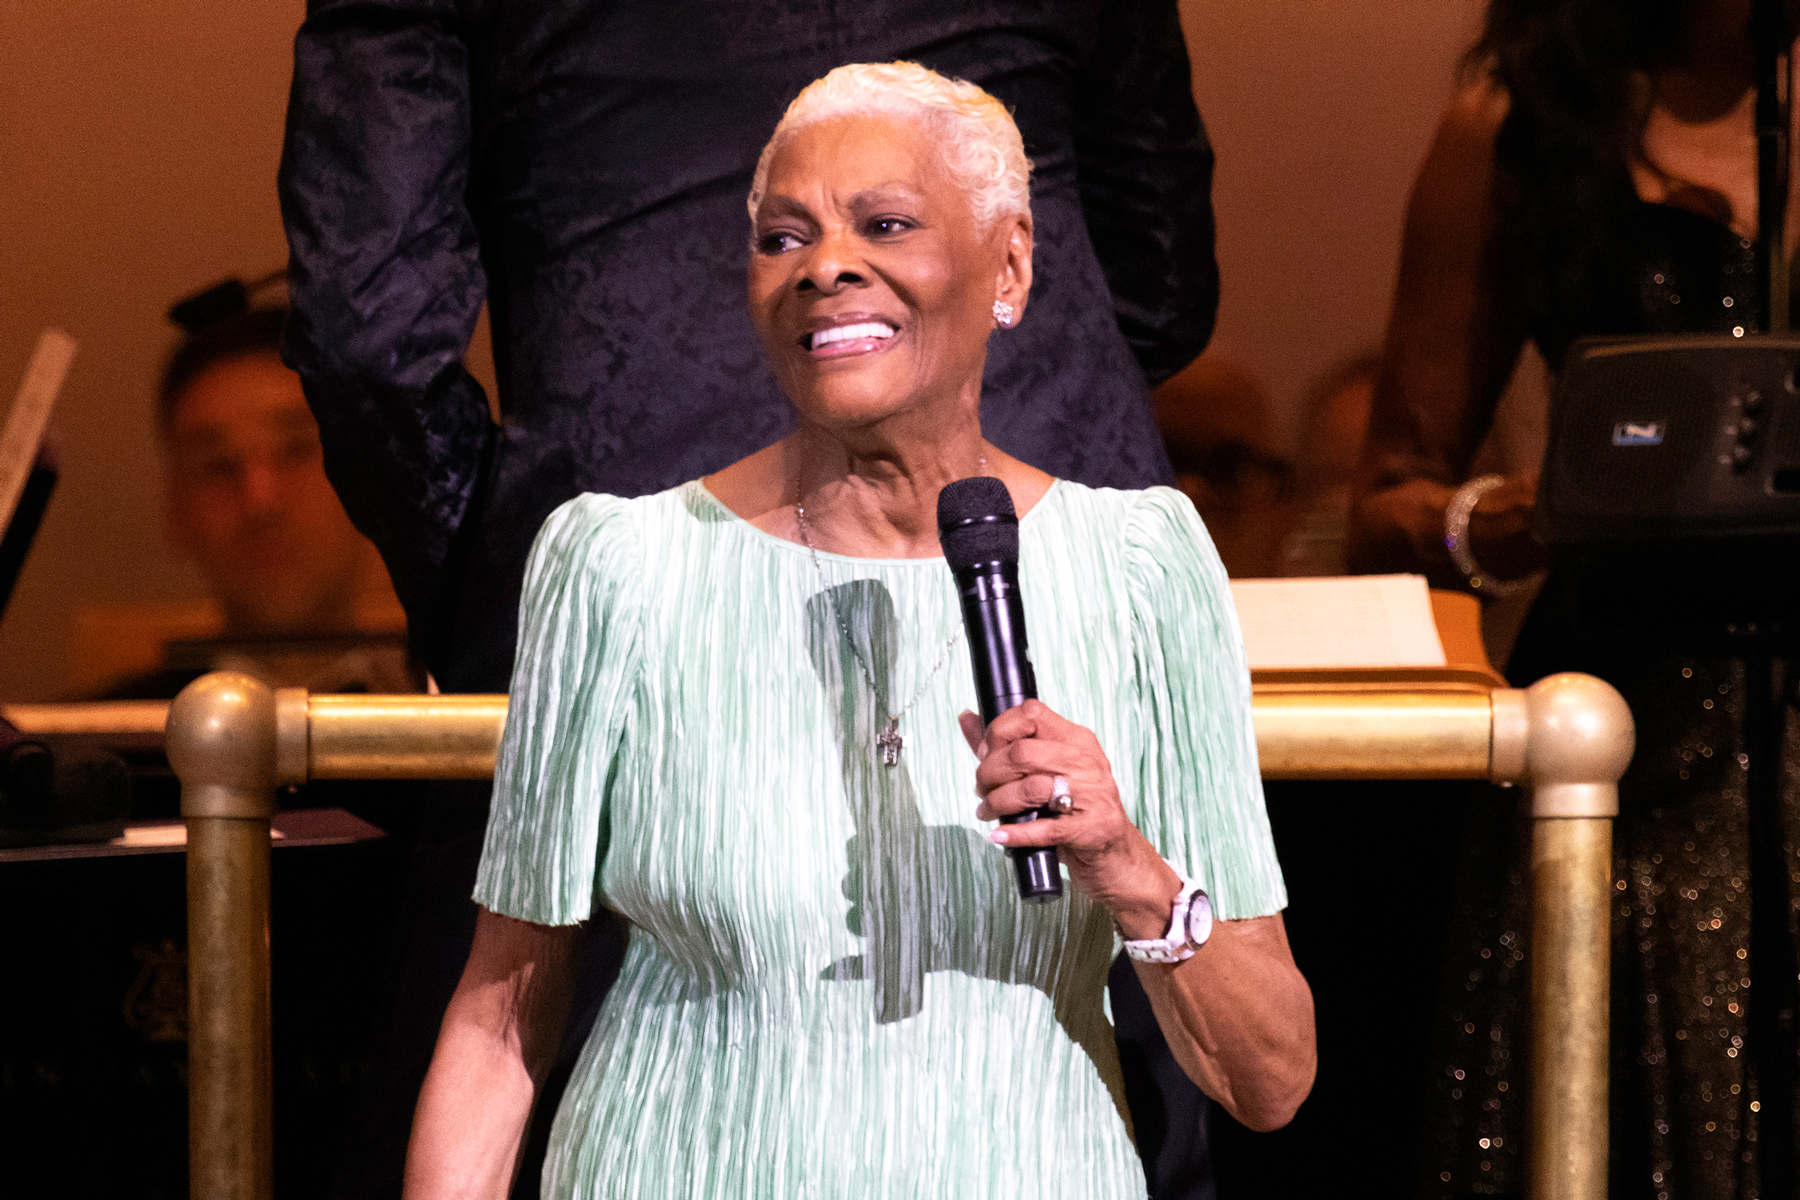 Dionne Warwick on Her Rock Hall Induction: ‘I’ve Never Considered Myself a Rock & Roller’